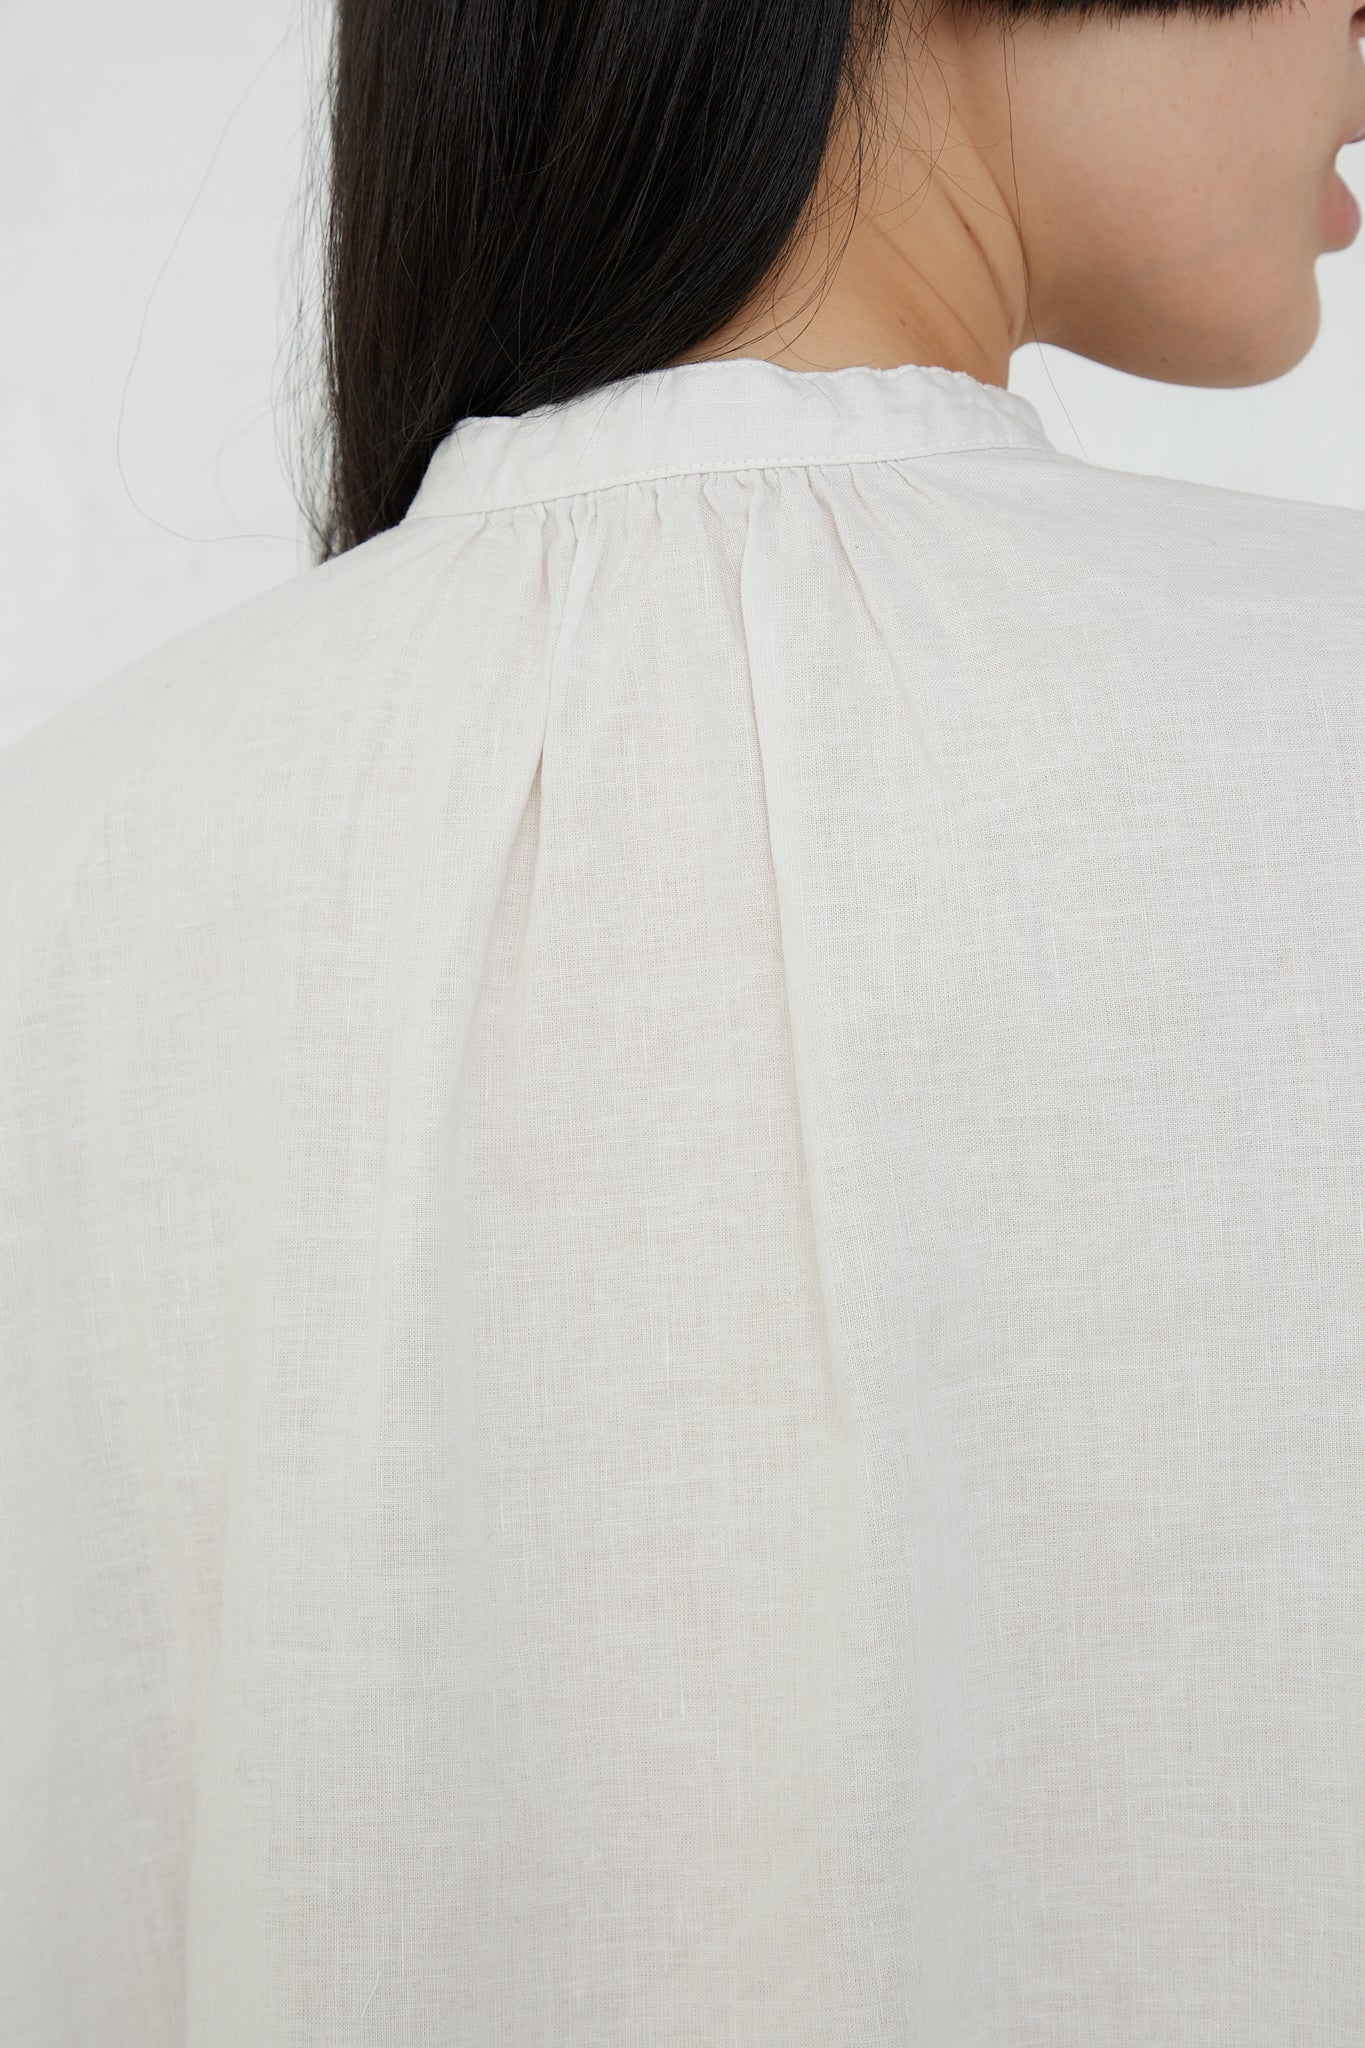 The back view of a woman wearing a nest Robe UpcycleLino Linen Gathered Frill Blouse in Off White.